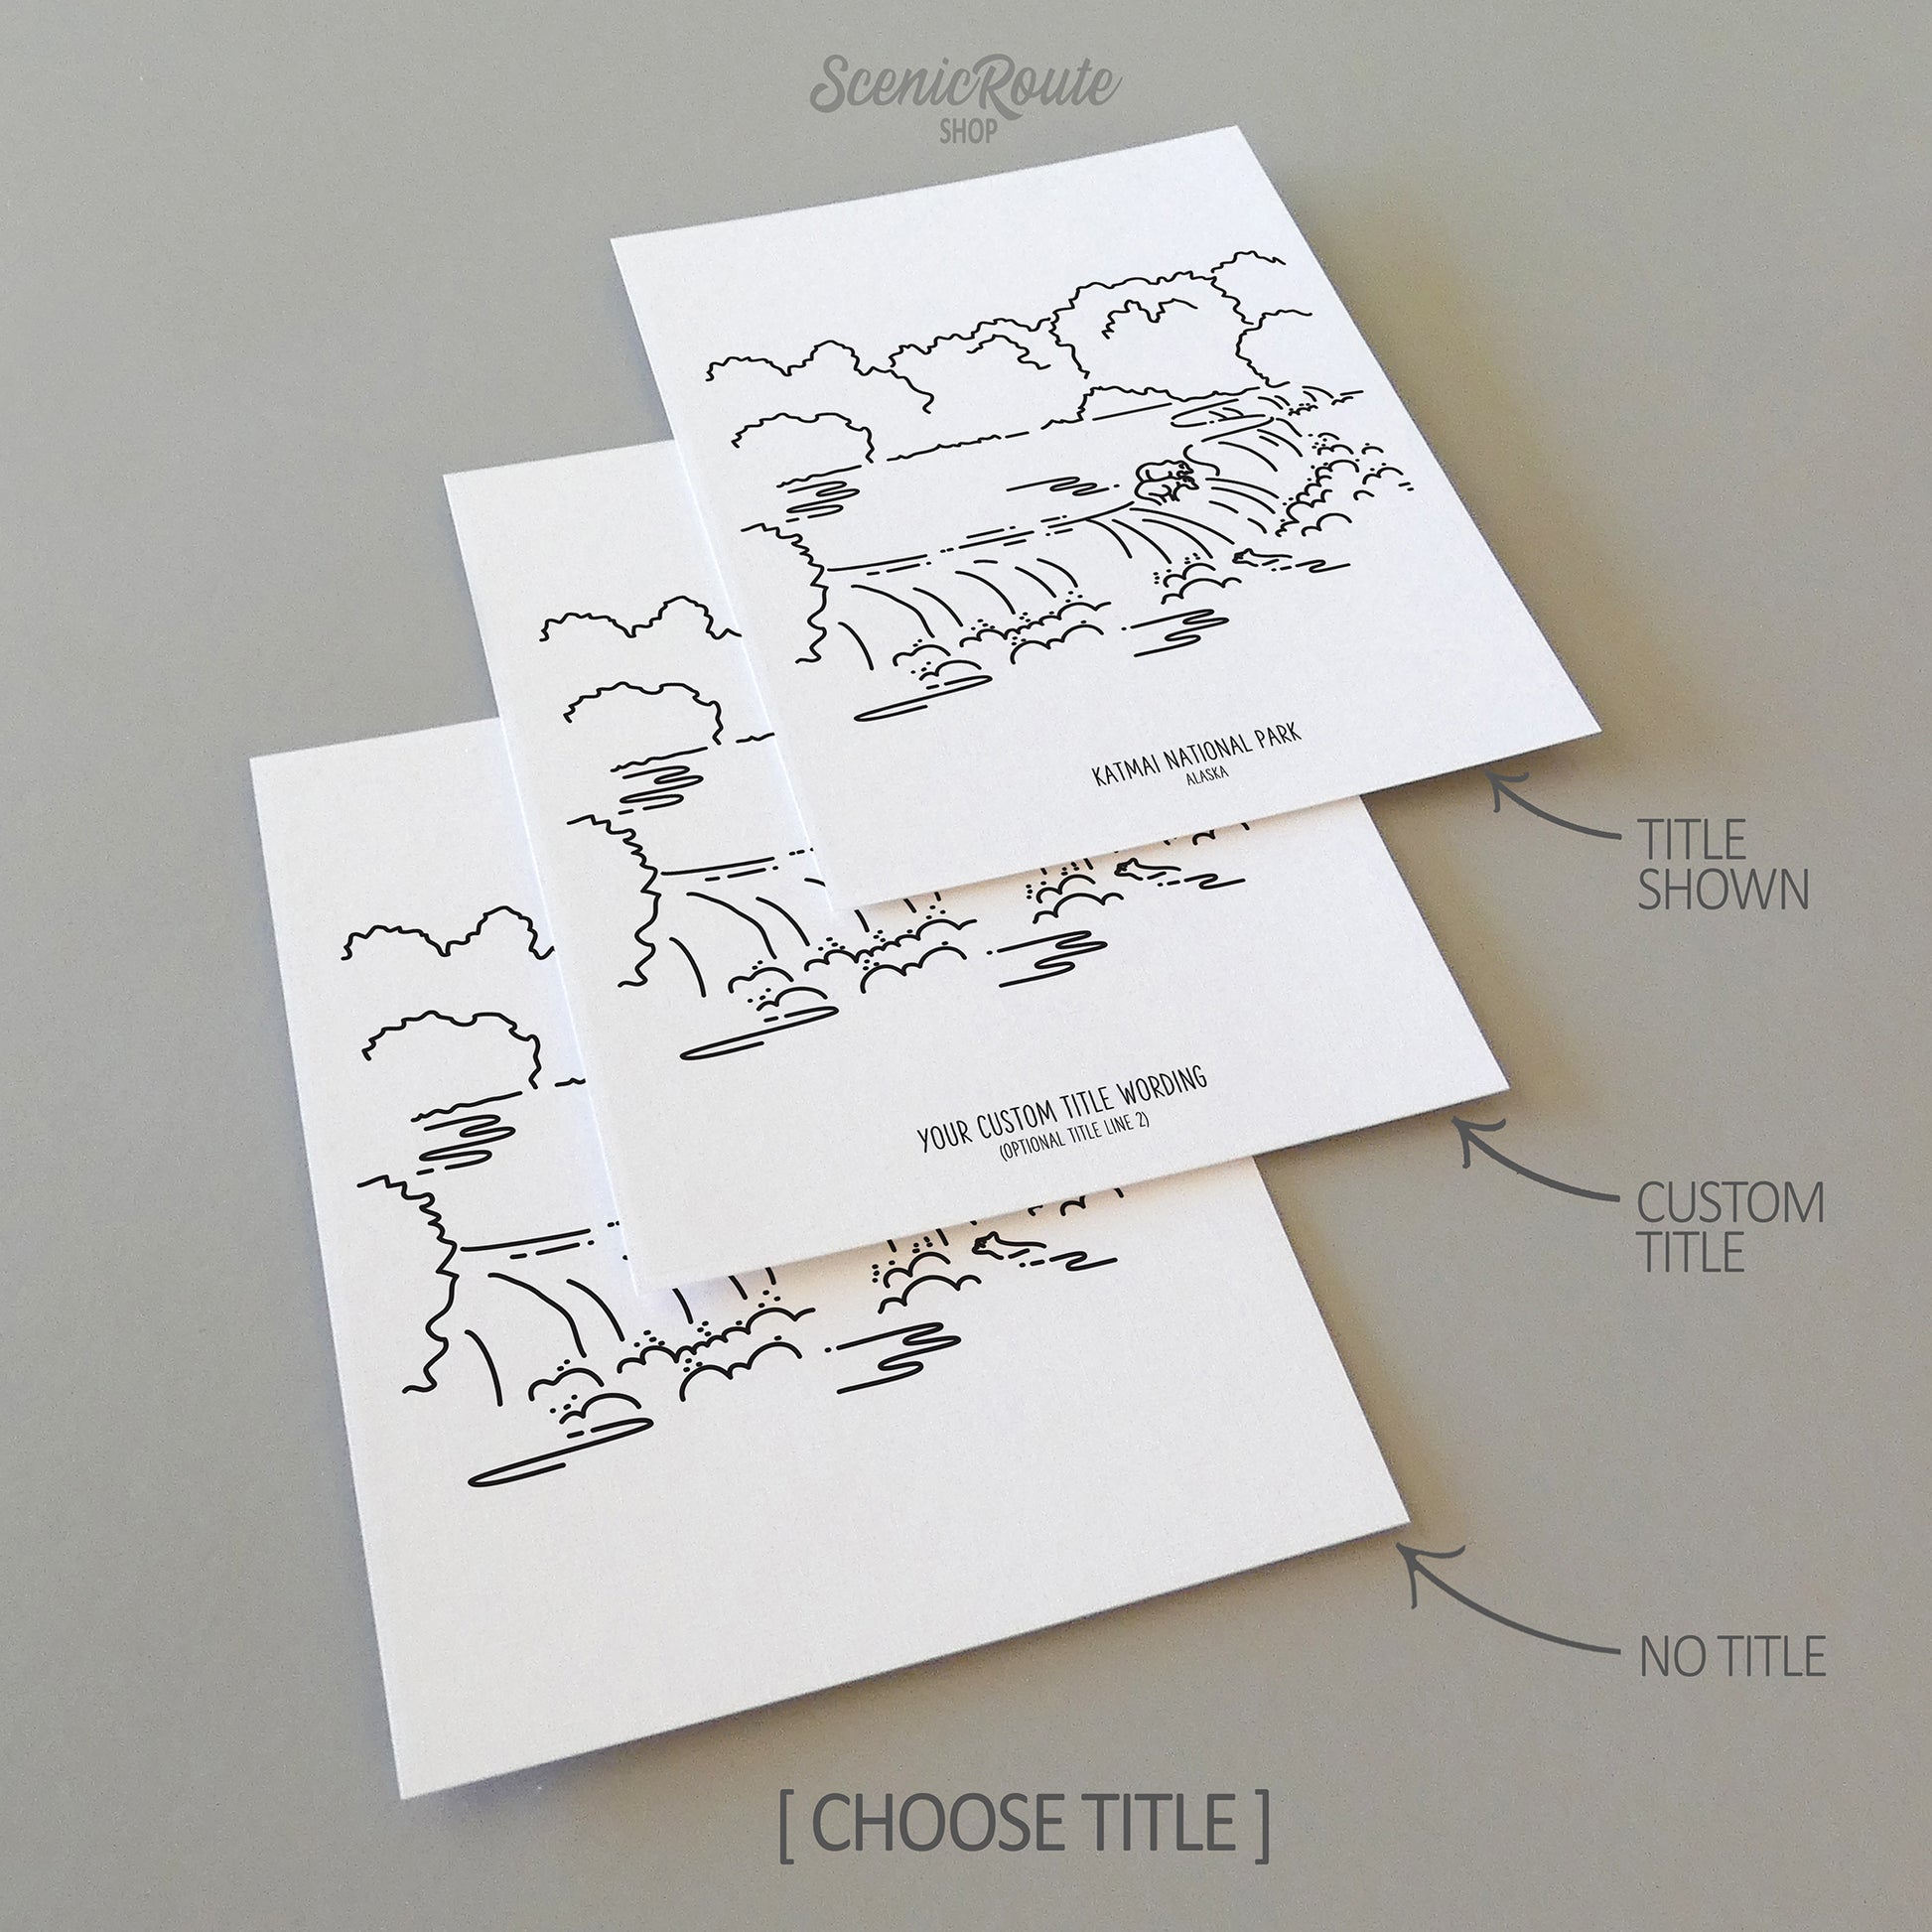 Three line art drawings of Katmai National Park on white linen paper with a gray background. The pieces are shown with title options that can be chosen and personalized.